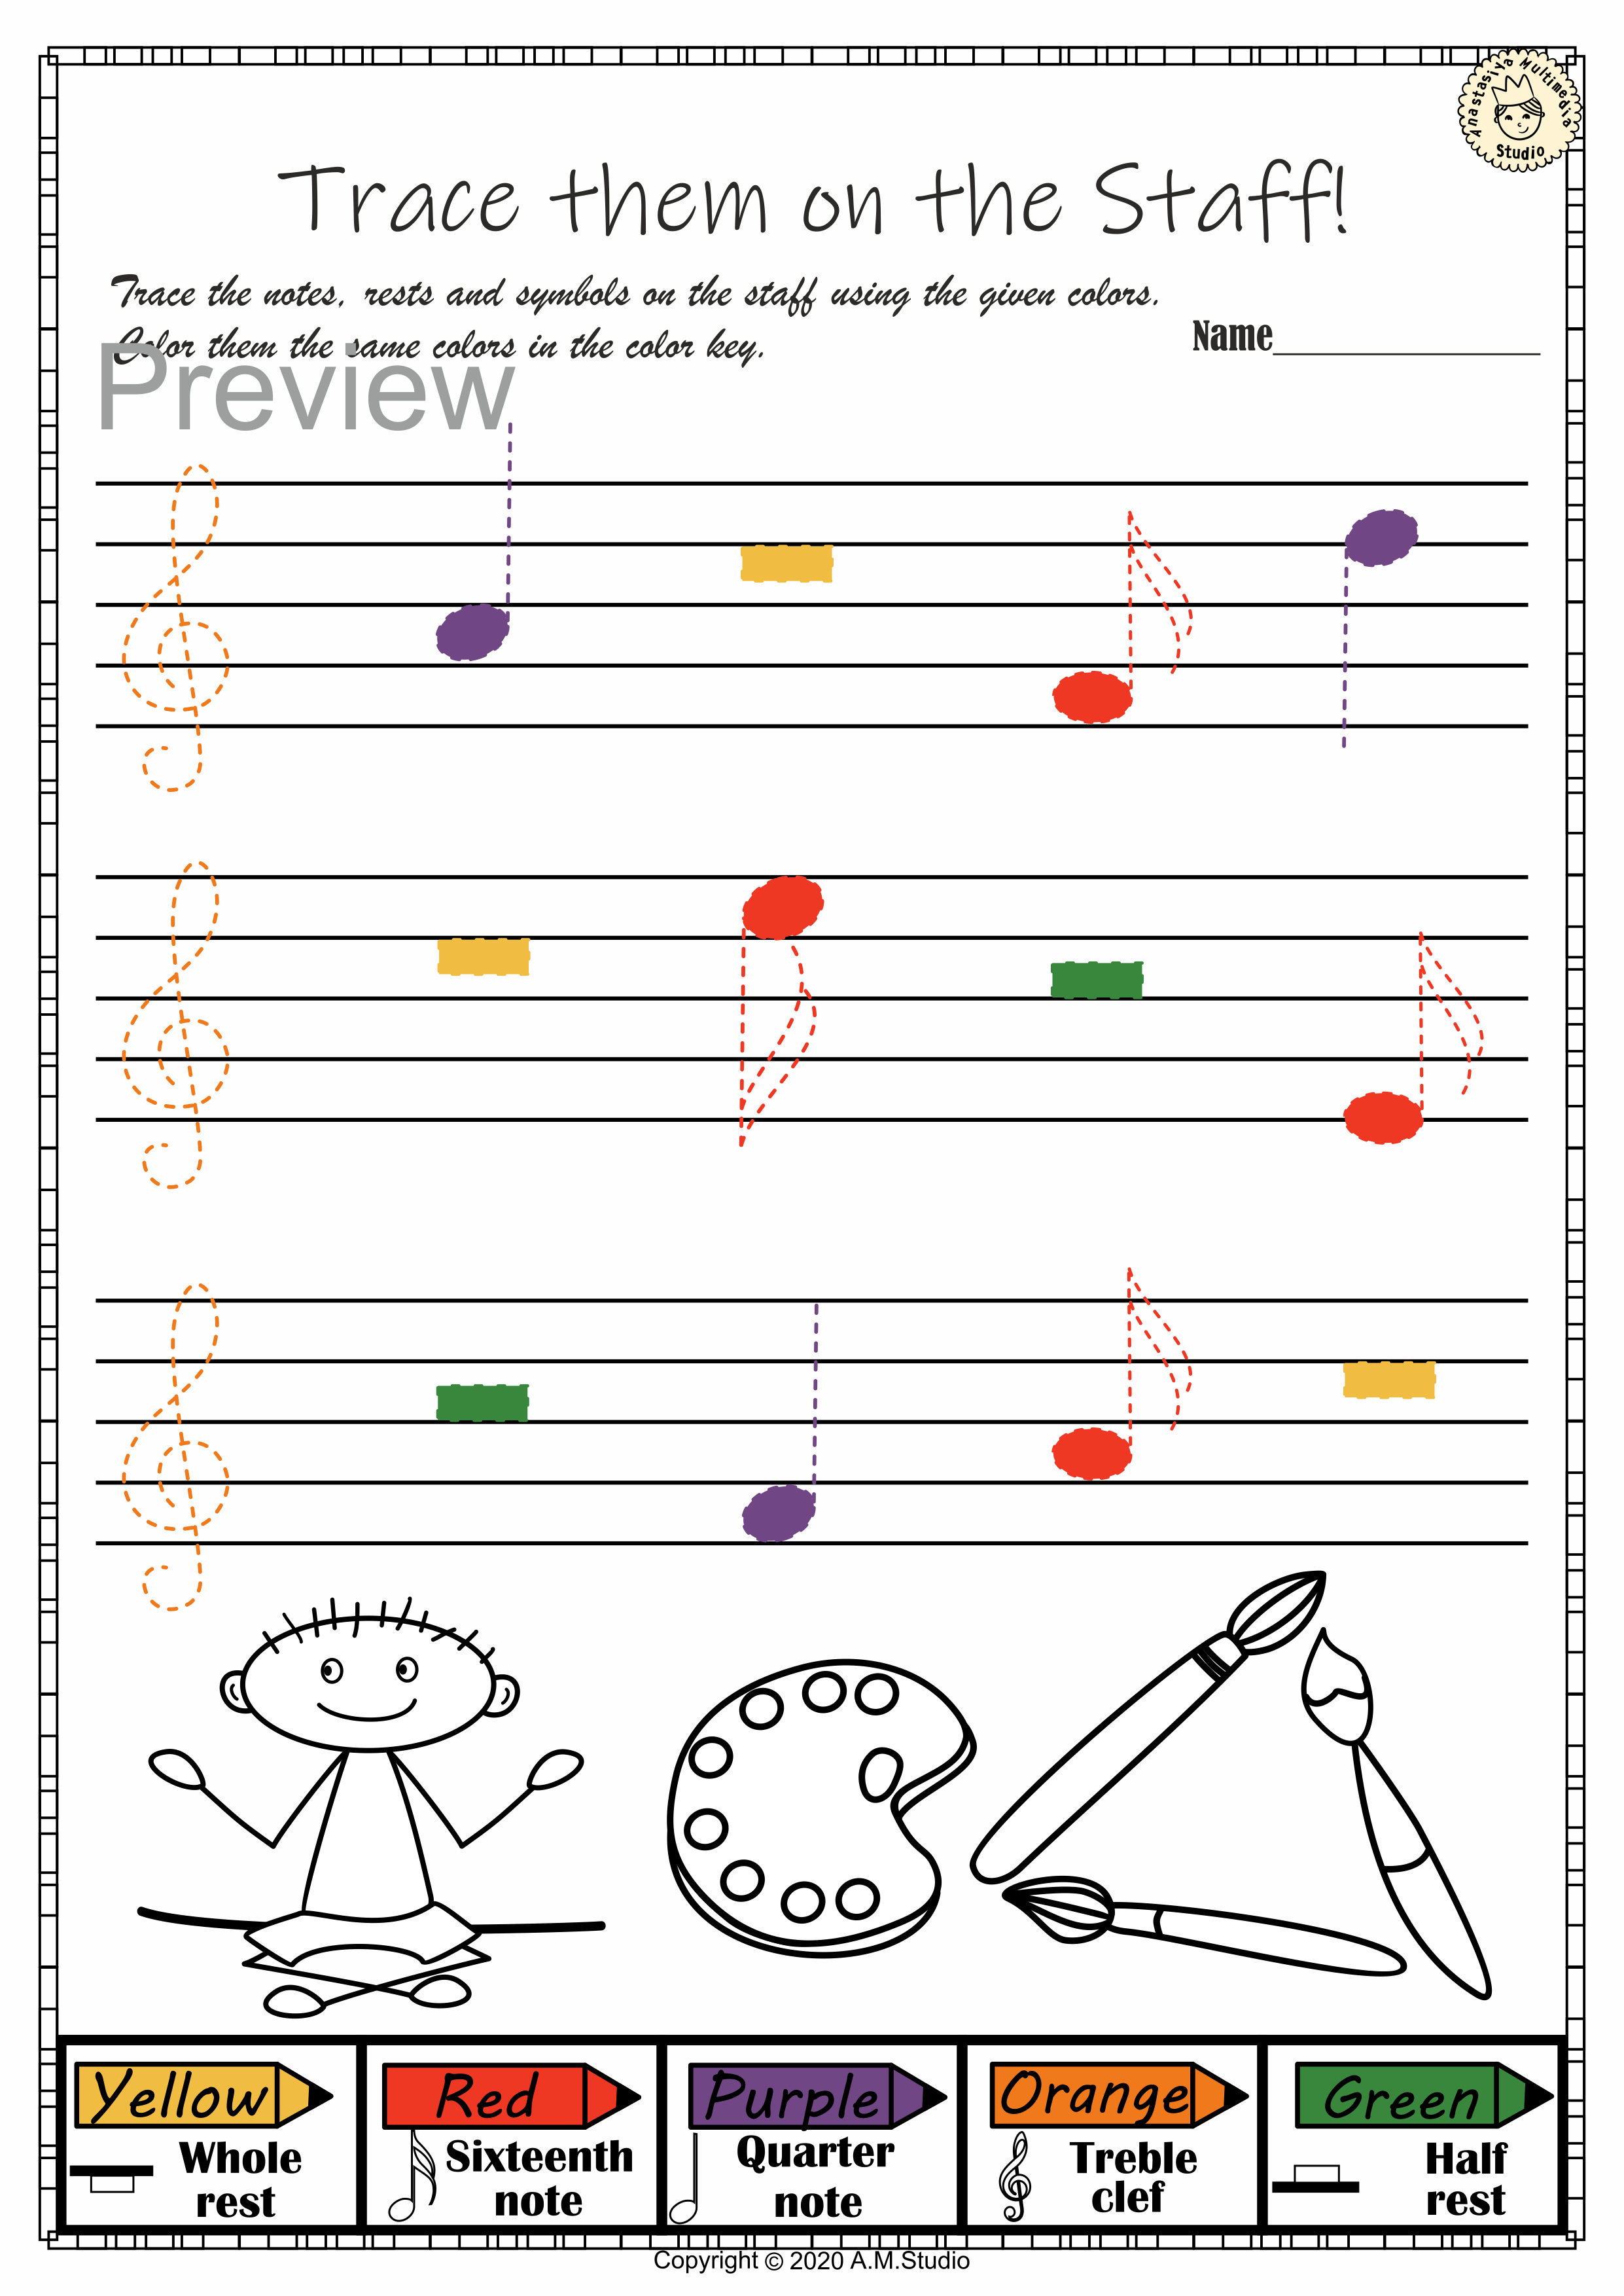 Back to School Trace and Color Music Pages #2 (img # 3)